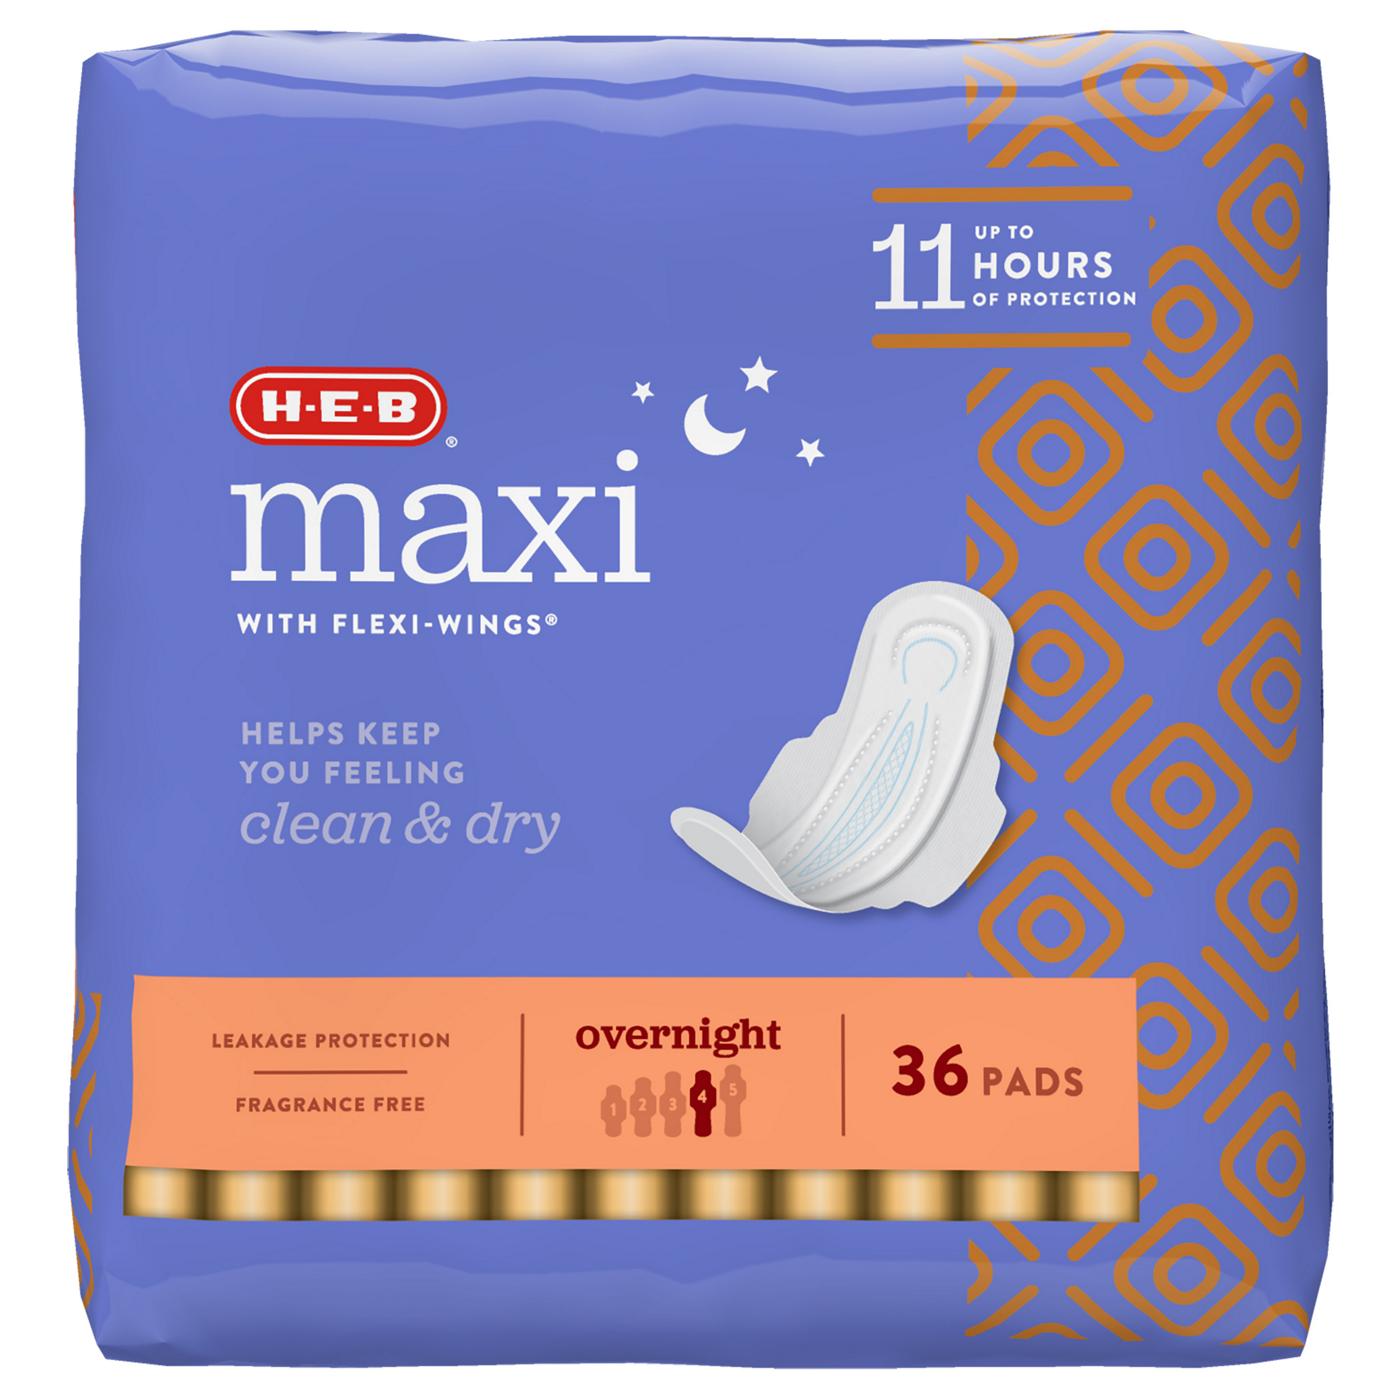 H-E-B Maxi with Flexi-Wings Overnight Pads; image 1 of 7